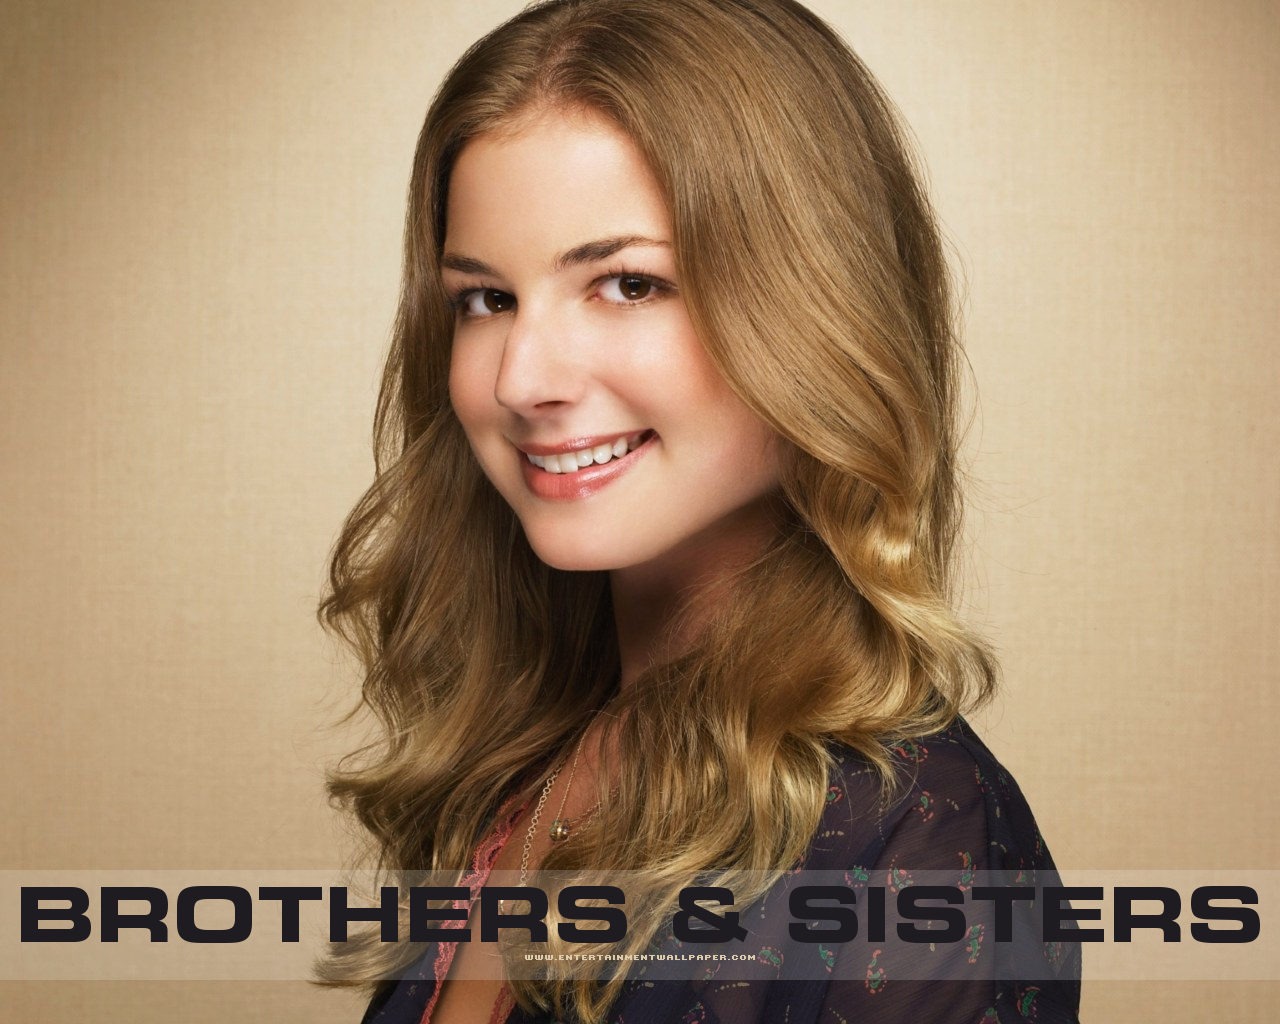 Brothers & Sisters wallpaper #23 - 1280x1024